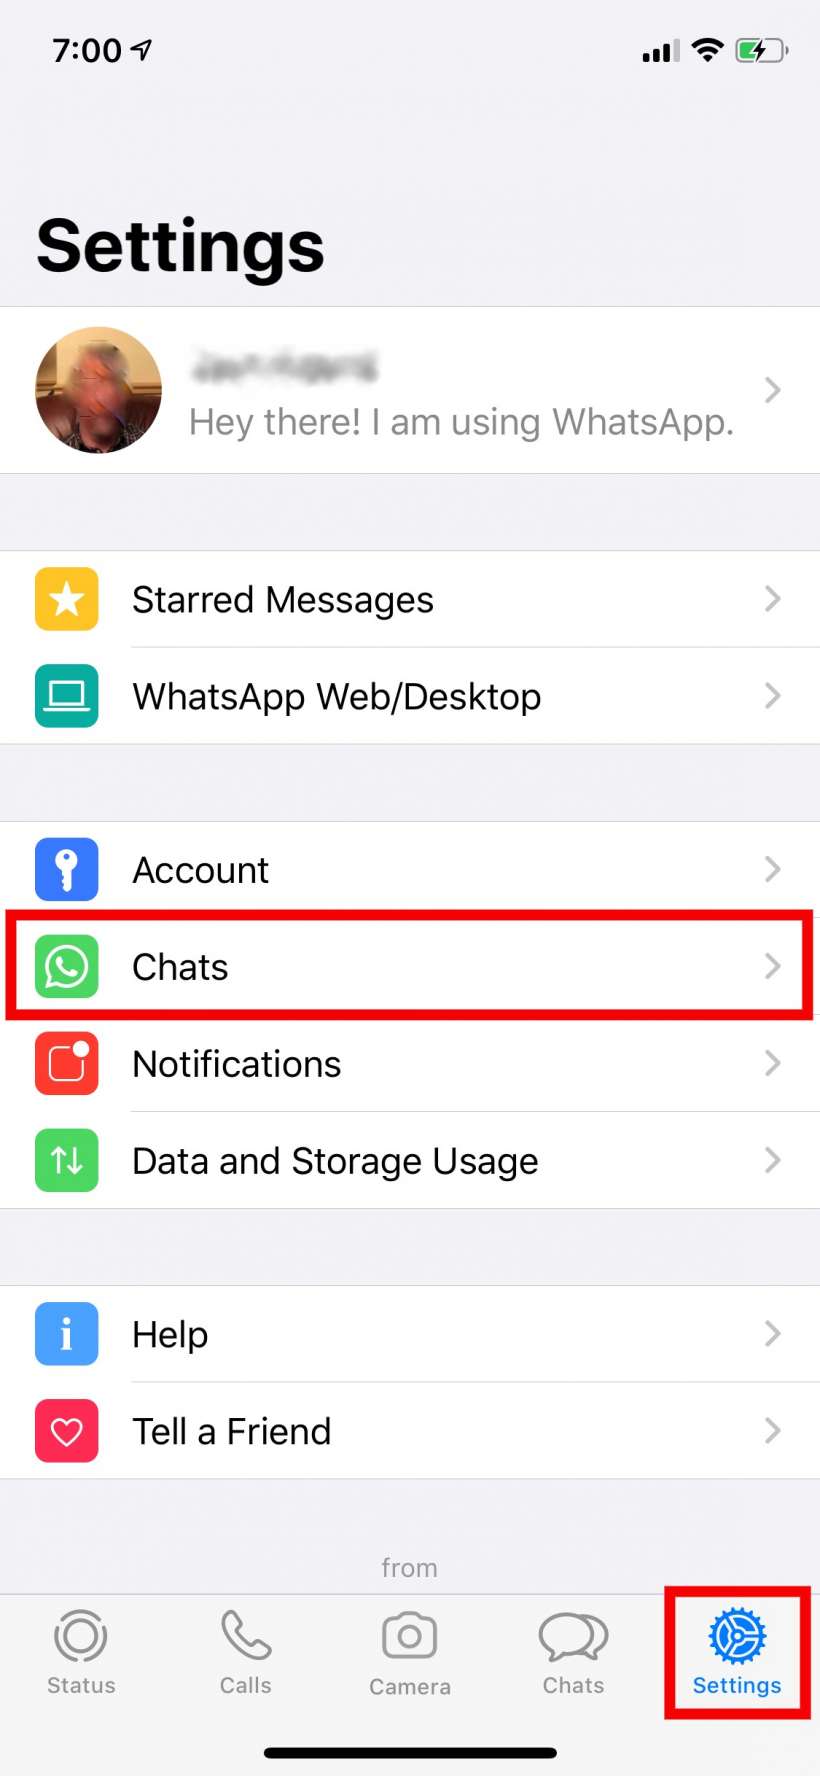 How to backup your WhatsApp chats to iCloud on iPhone and iPad.